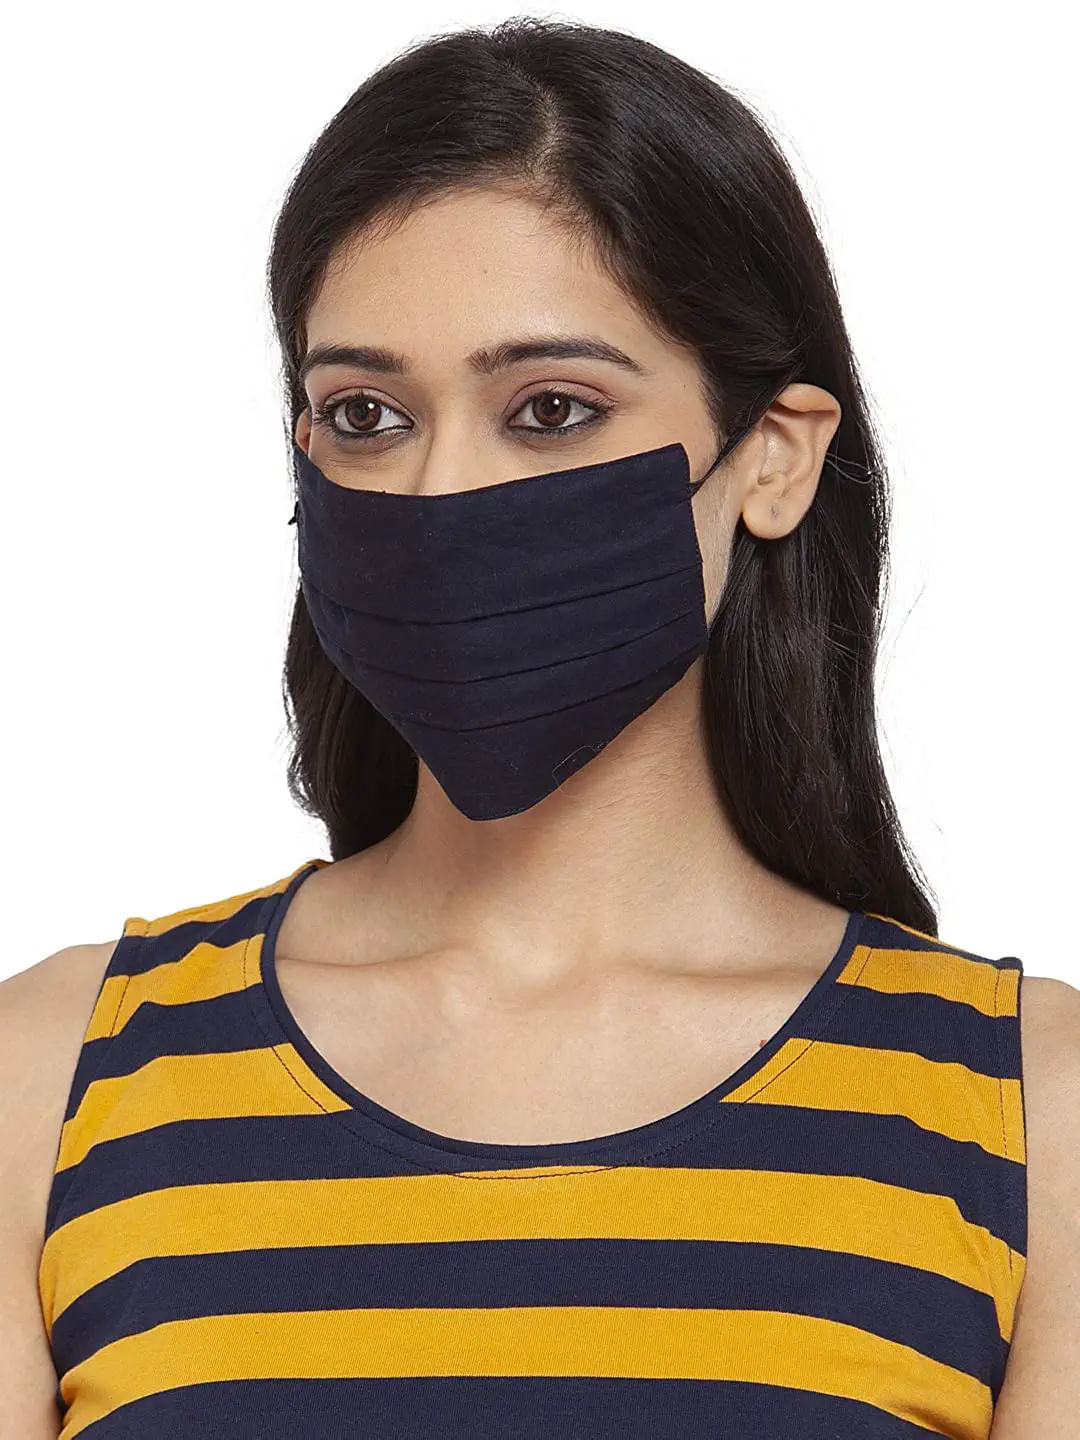 Unisex 3-Layer Adjustable & Stretchable Protective Mask with Ear Loops - Size L - Set of 5